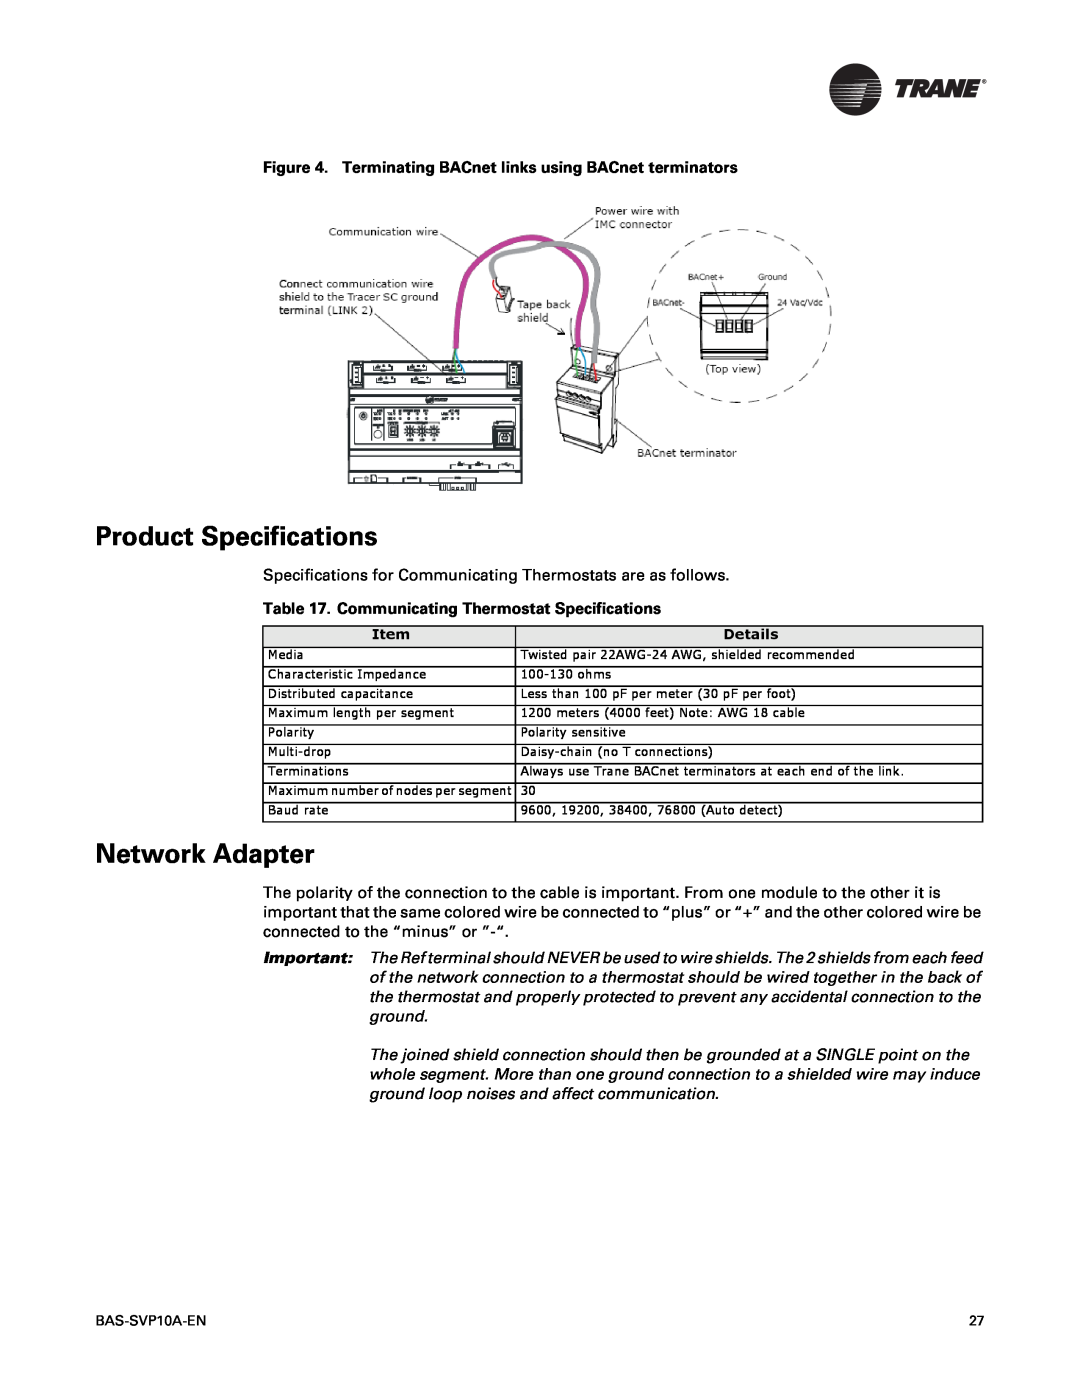 Trane Trane Communicating Thermostats (BACnet), BAS-SVP10A-EN manual Product Specifications, Network Adapter 